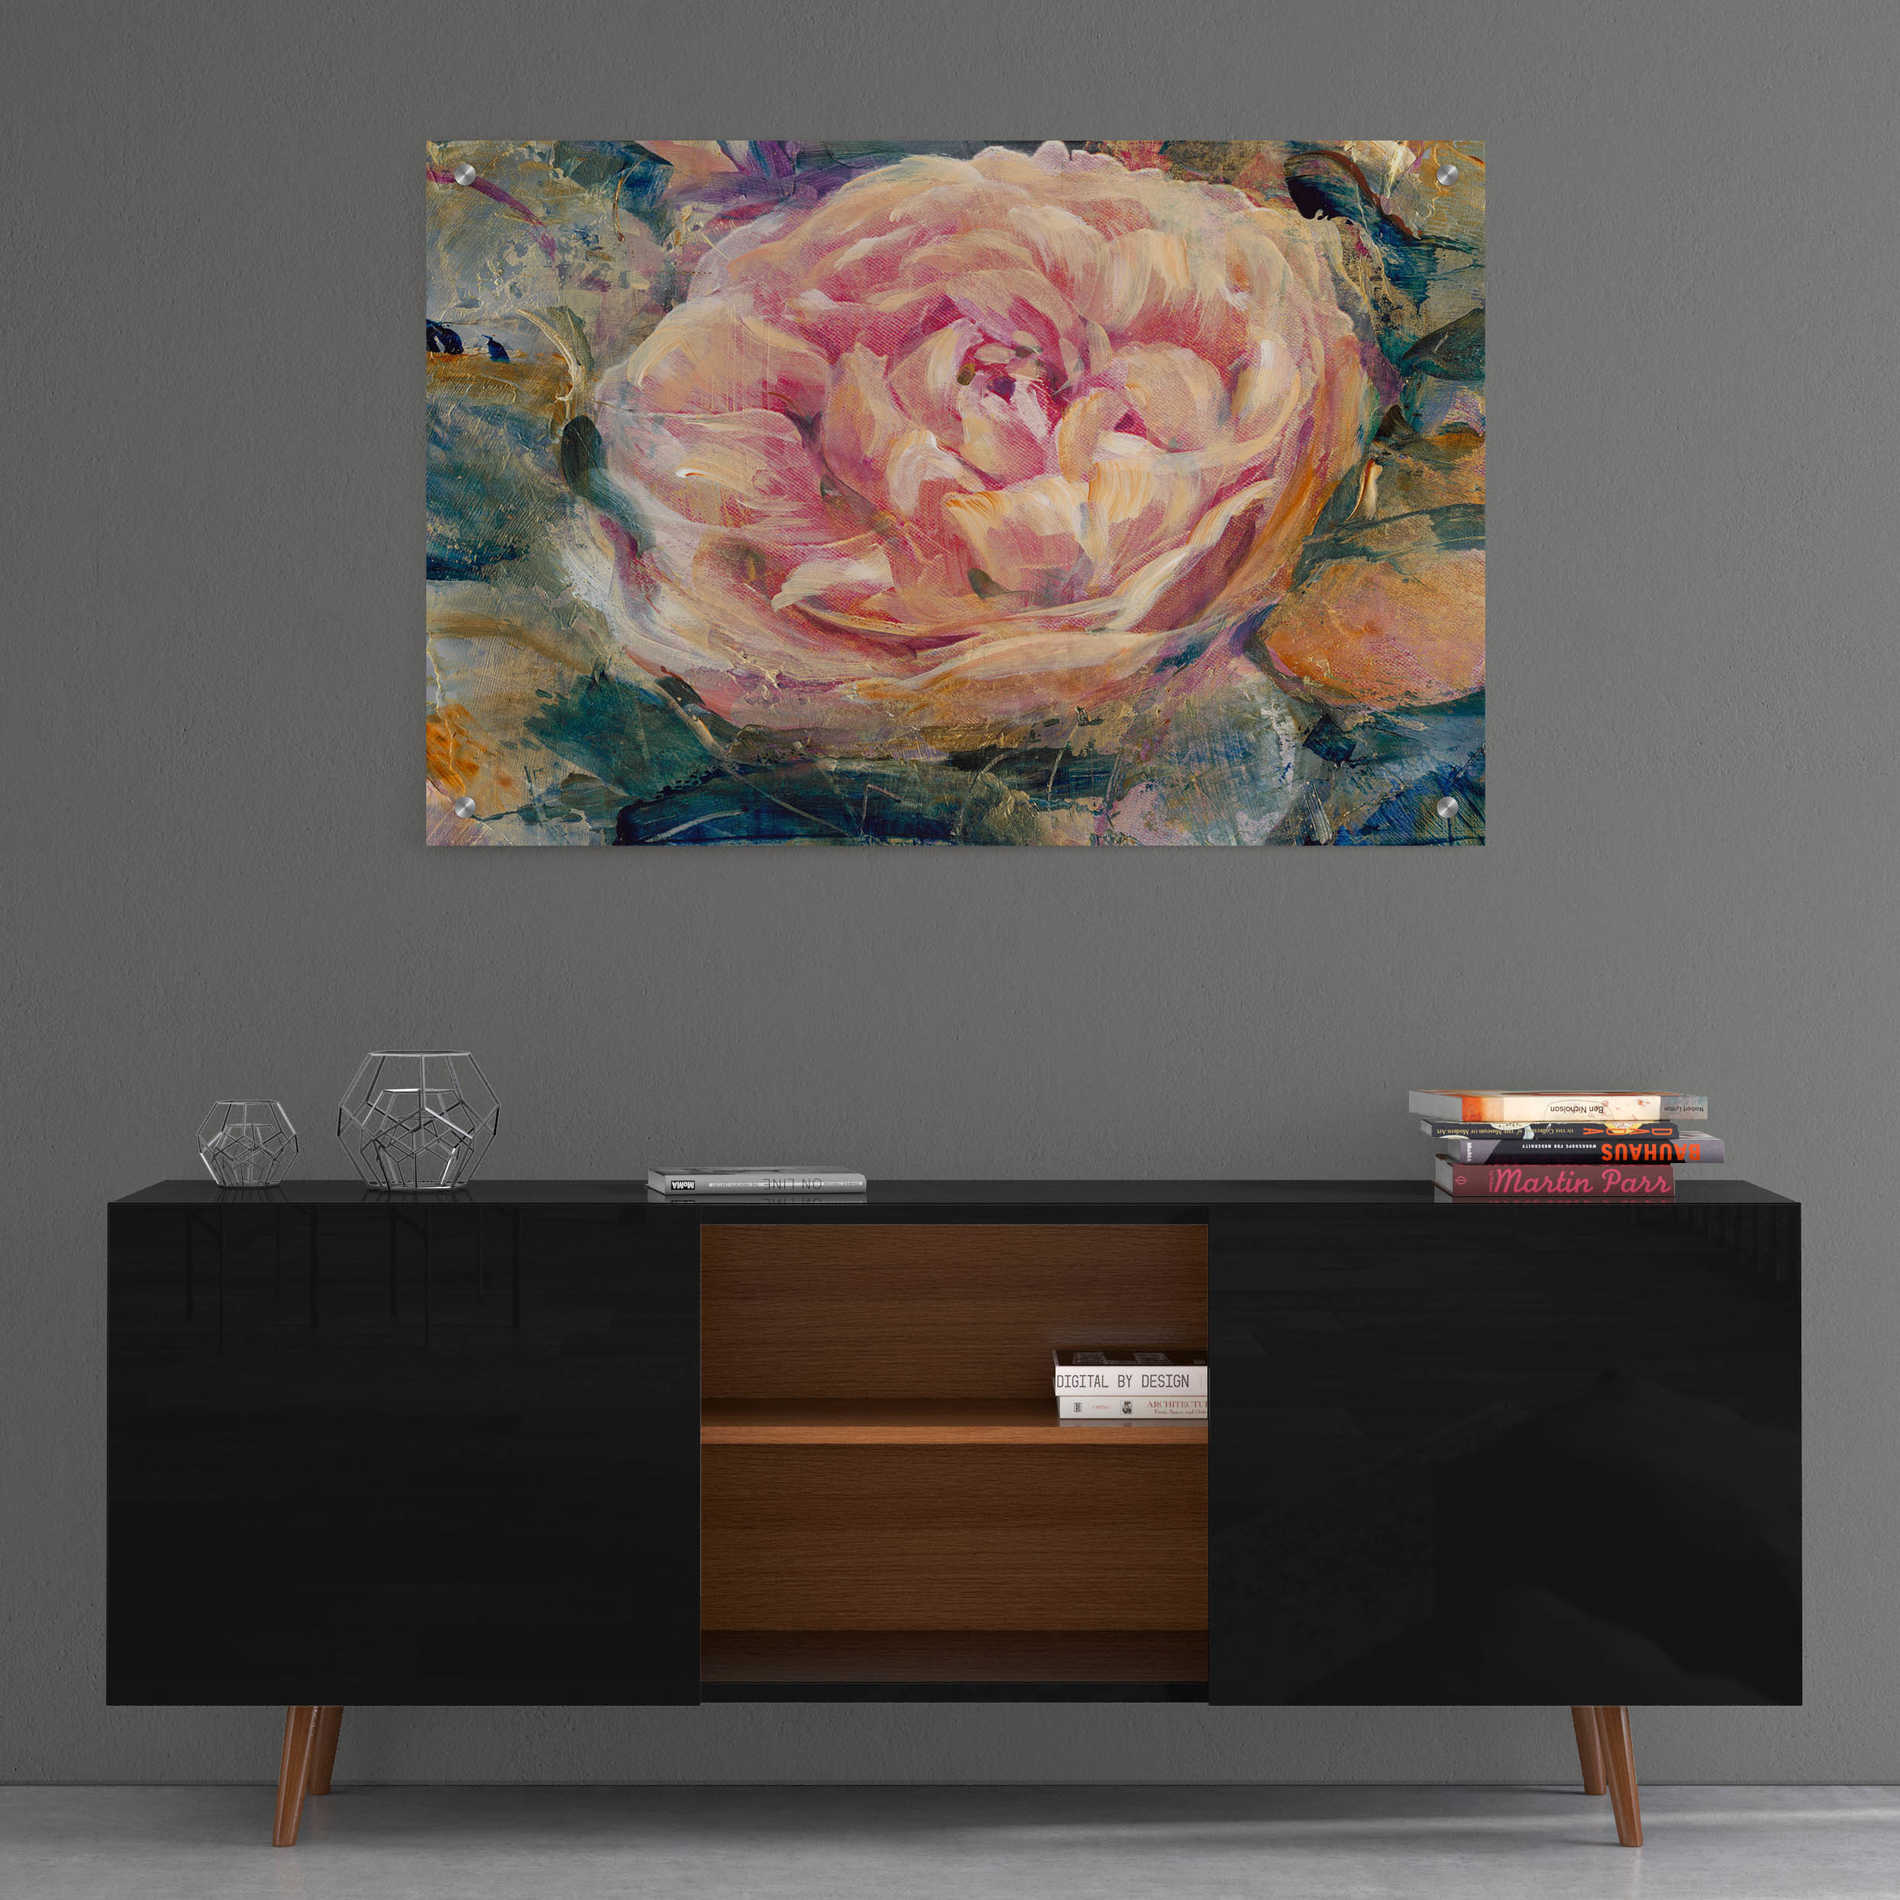 Epic Art 'Floral in Bloom IV' by Tim O'Toole, Acrylic Glass Wall Art,36x24